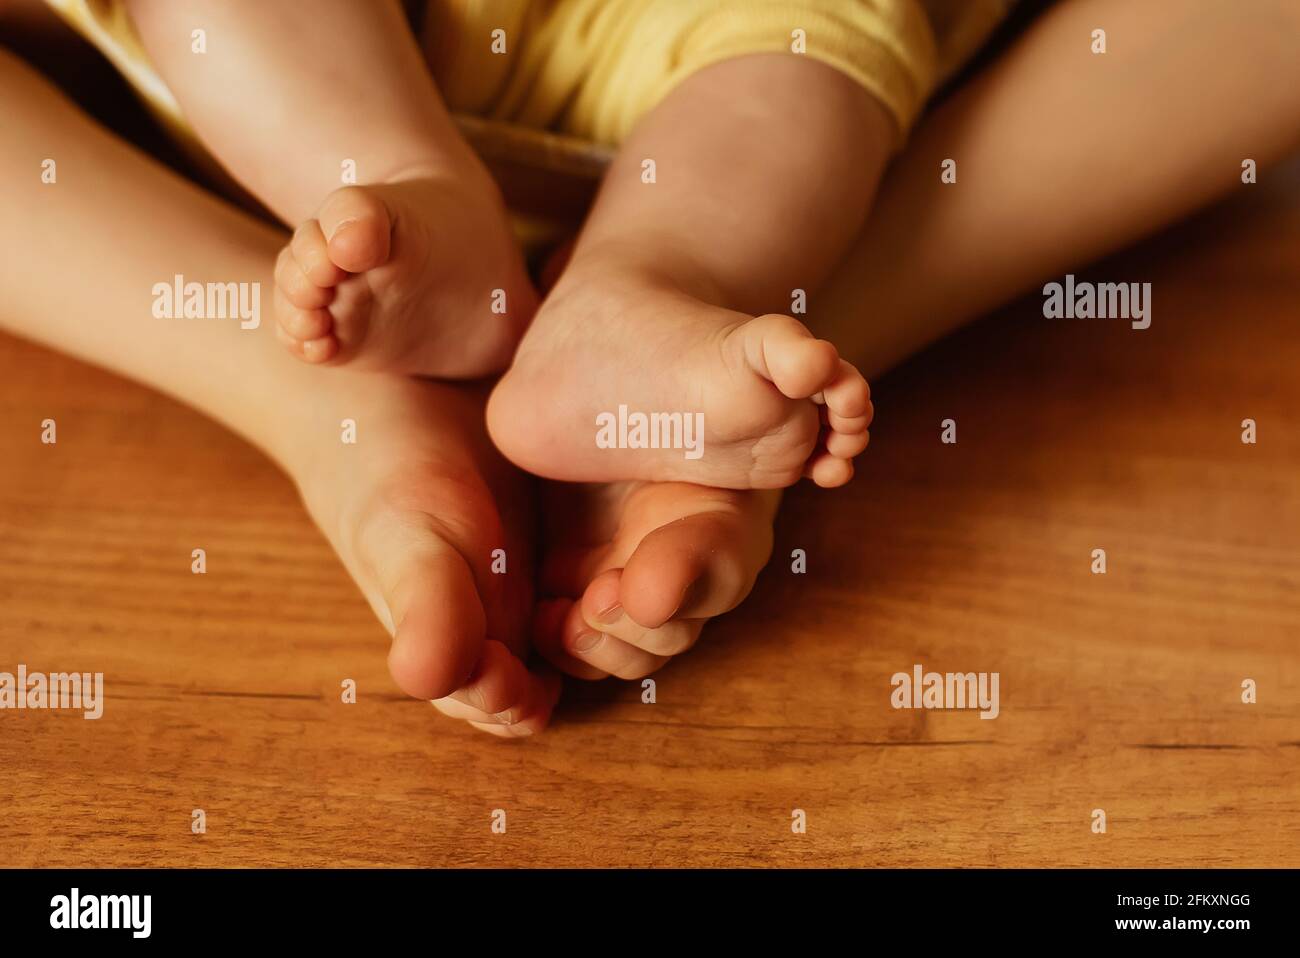 Two girls sisters different age sit together barefoot on wooden floor Stock Photo